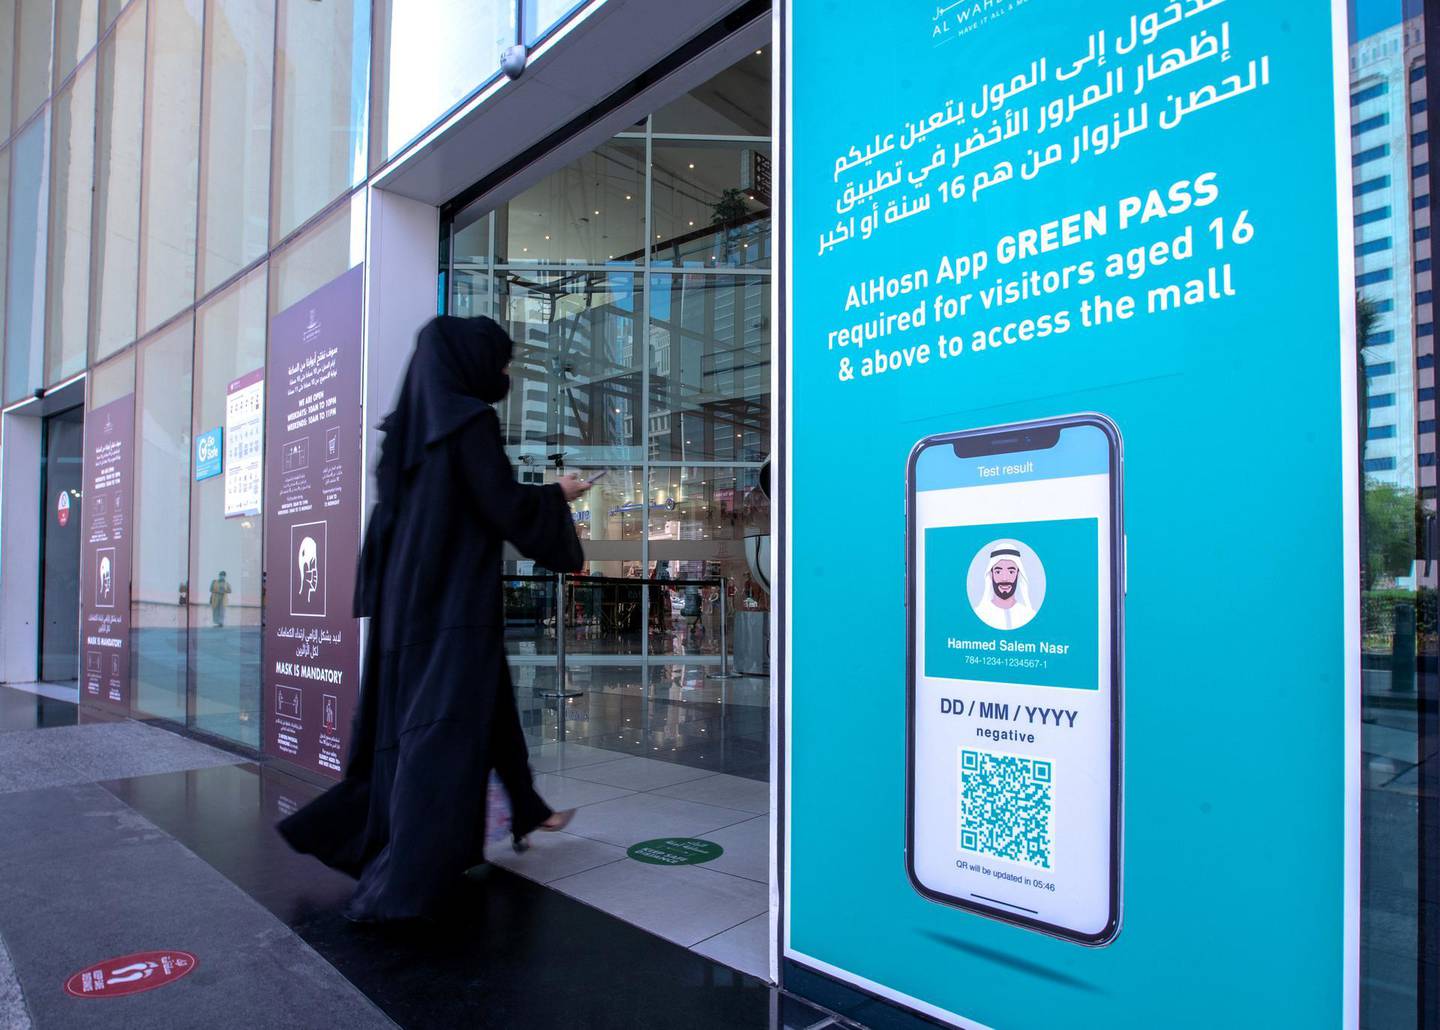 Al Hosn Green Pass awareness signages are put up at the Al Wahda Mall, Abu Dhabi on June 14th, 2021. The new Covid-19 restrictions start tomorrow. Victor Besa / The National.